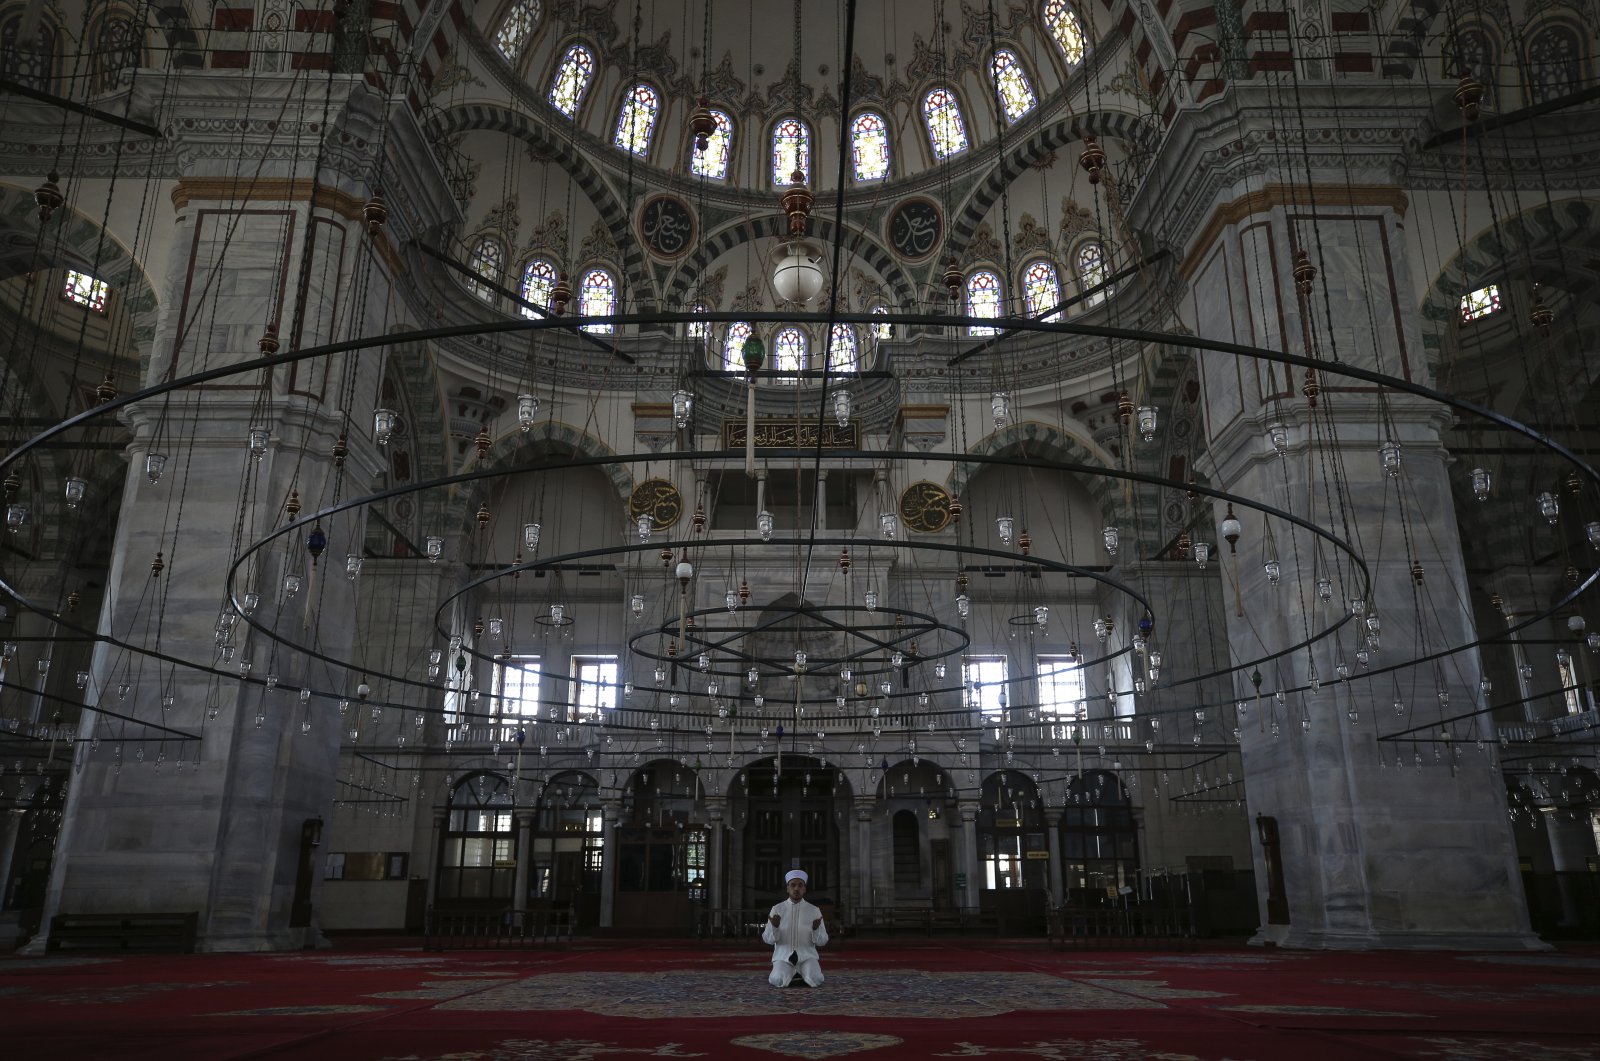 Esat Şahin, imam of the iconic Fatih Mosque, conducts a prayer during the first day of the holy fasting month of Ramadan without the public due to coronavirus restrictions, Istanbul, Turkey, April 24, 2020. (AP Photo)
